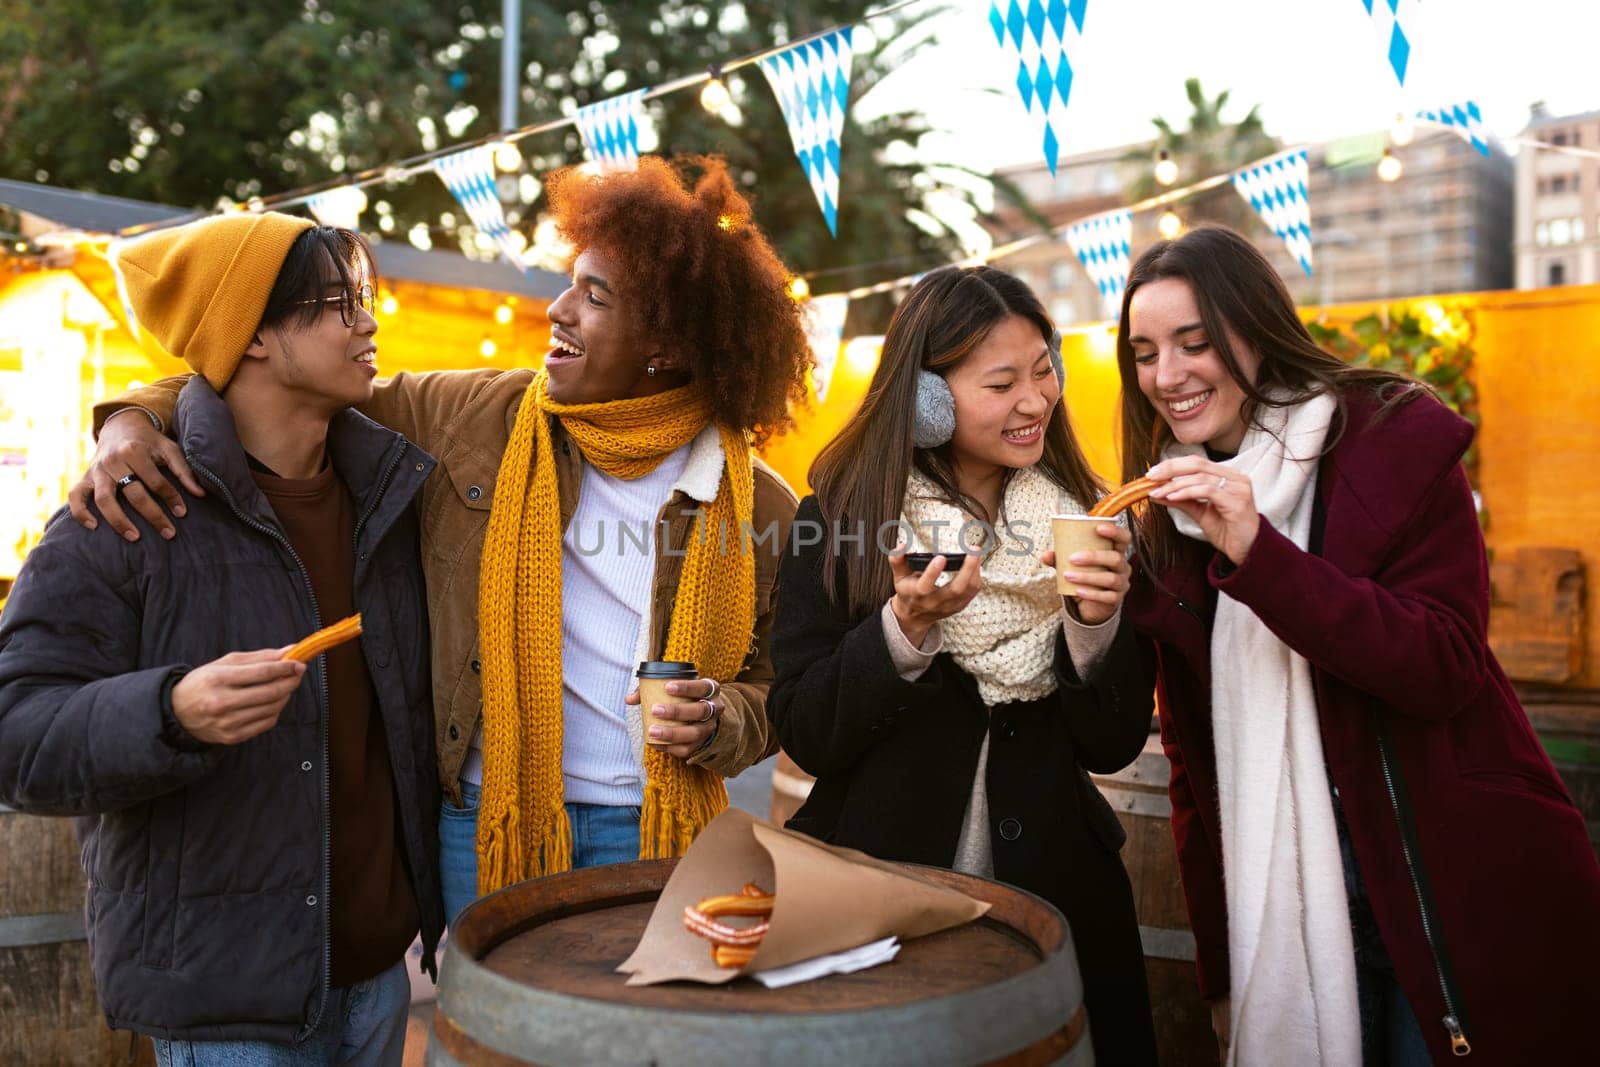 Multiracial friends drinking hot chocolate and eating churros at a winter market. Friendship concept.